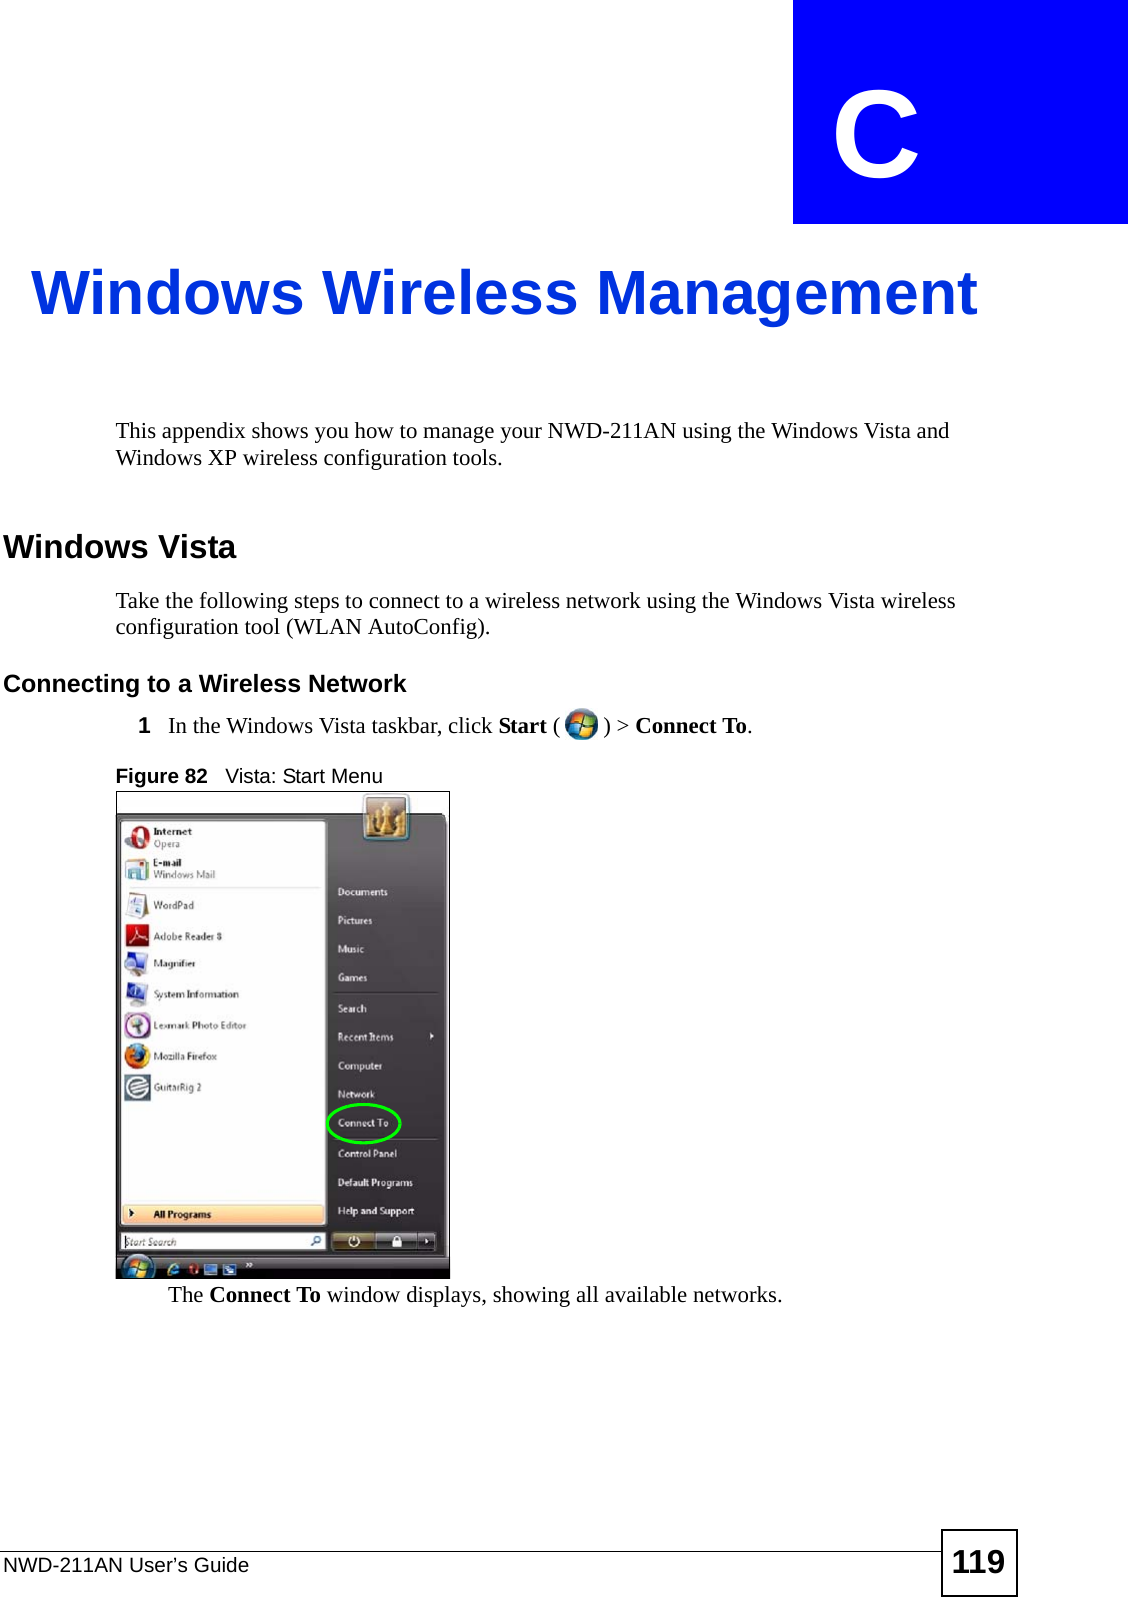 NWD-211AN User’s Guide 119APPENDIX  C Windows Wireless ManagementThis appendix shows you how to manage your NWD-211AN using the Windows Vista and Windows XP wireless configuration tools.Windows VistaTake the following steps to connect to a wireless network using the Windows Vista wireless configuration tool (WLAN AutoConfig).Connecting to a Wireless Network1In the Windows Vista taskbar, click Start () &gt; Connect To. Figure 82   Vista: Start MenuThe Connect To window displays, showing all available networks. 